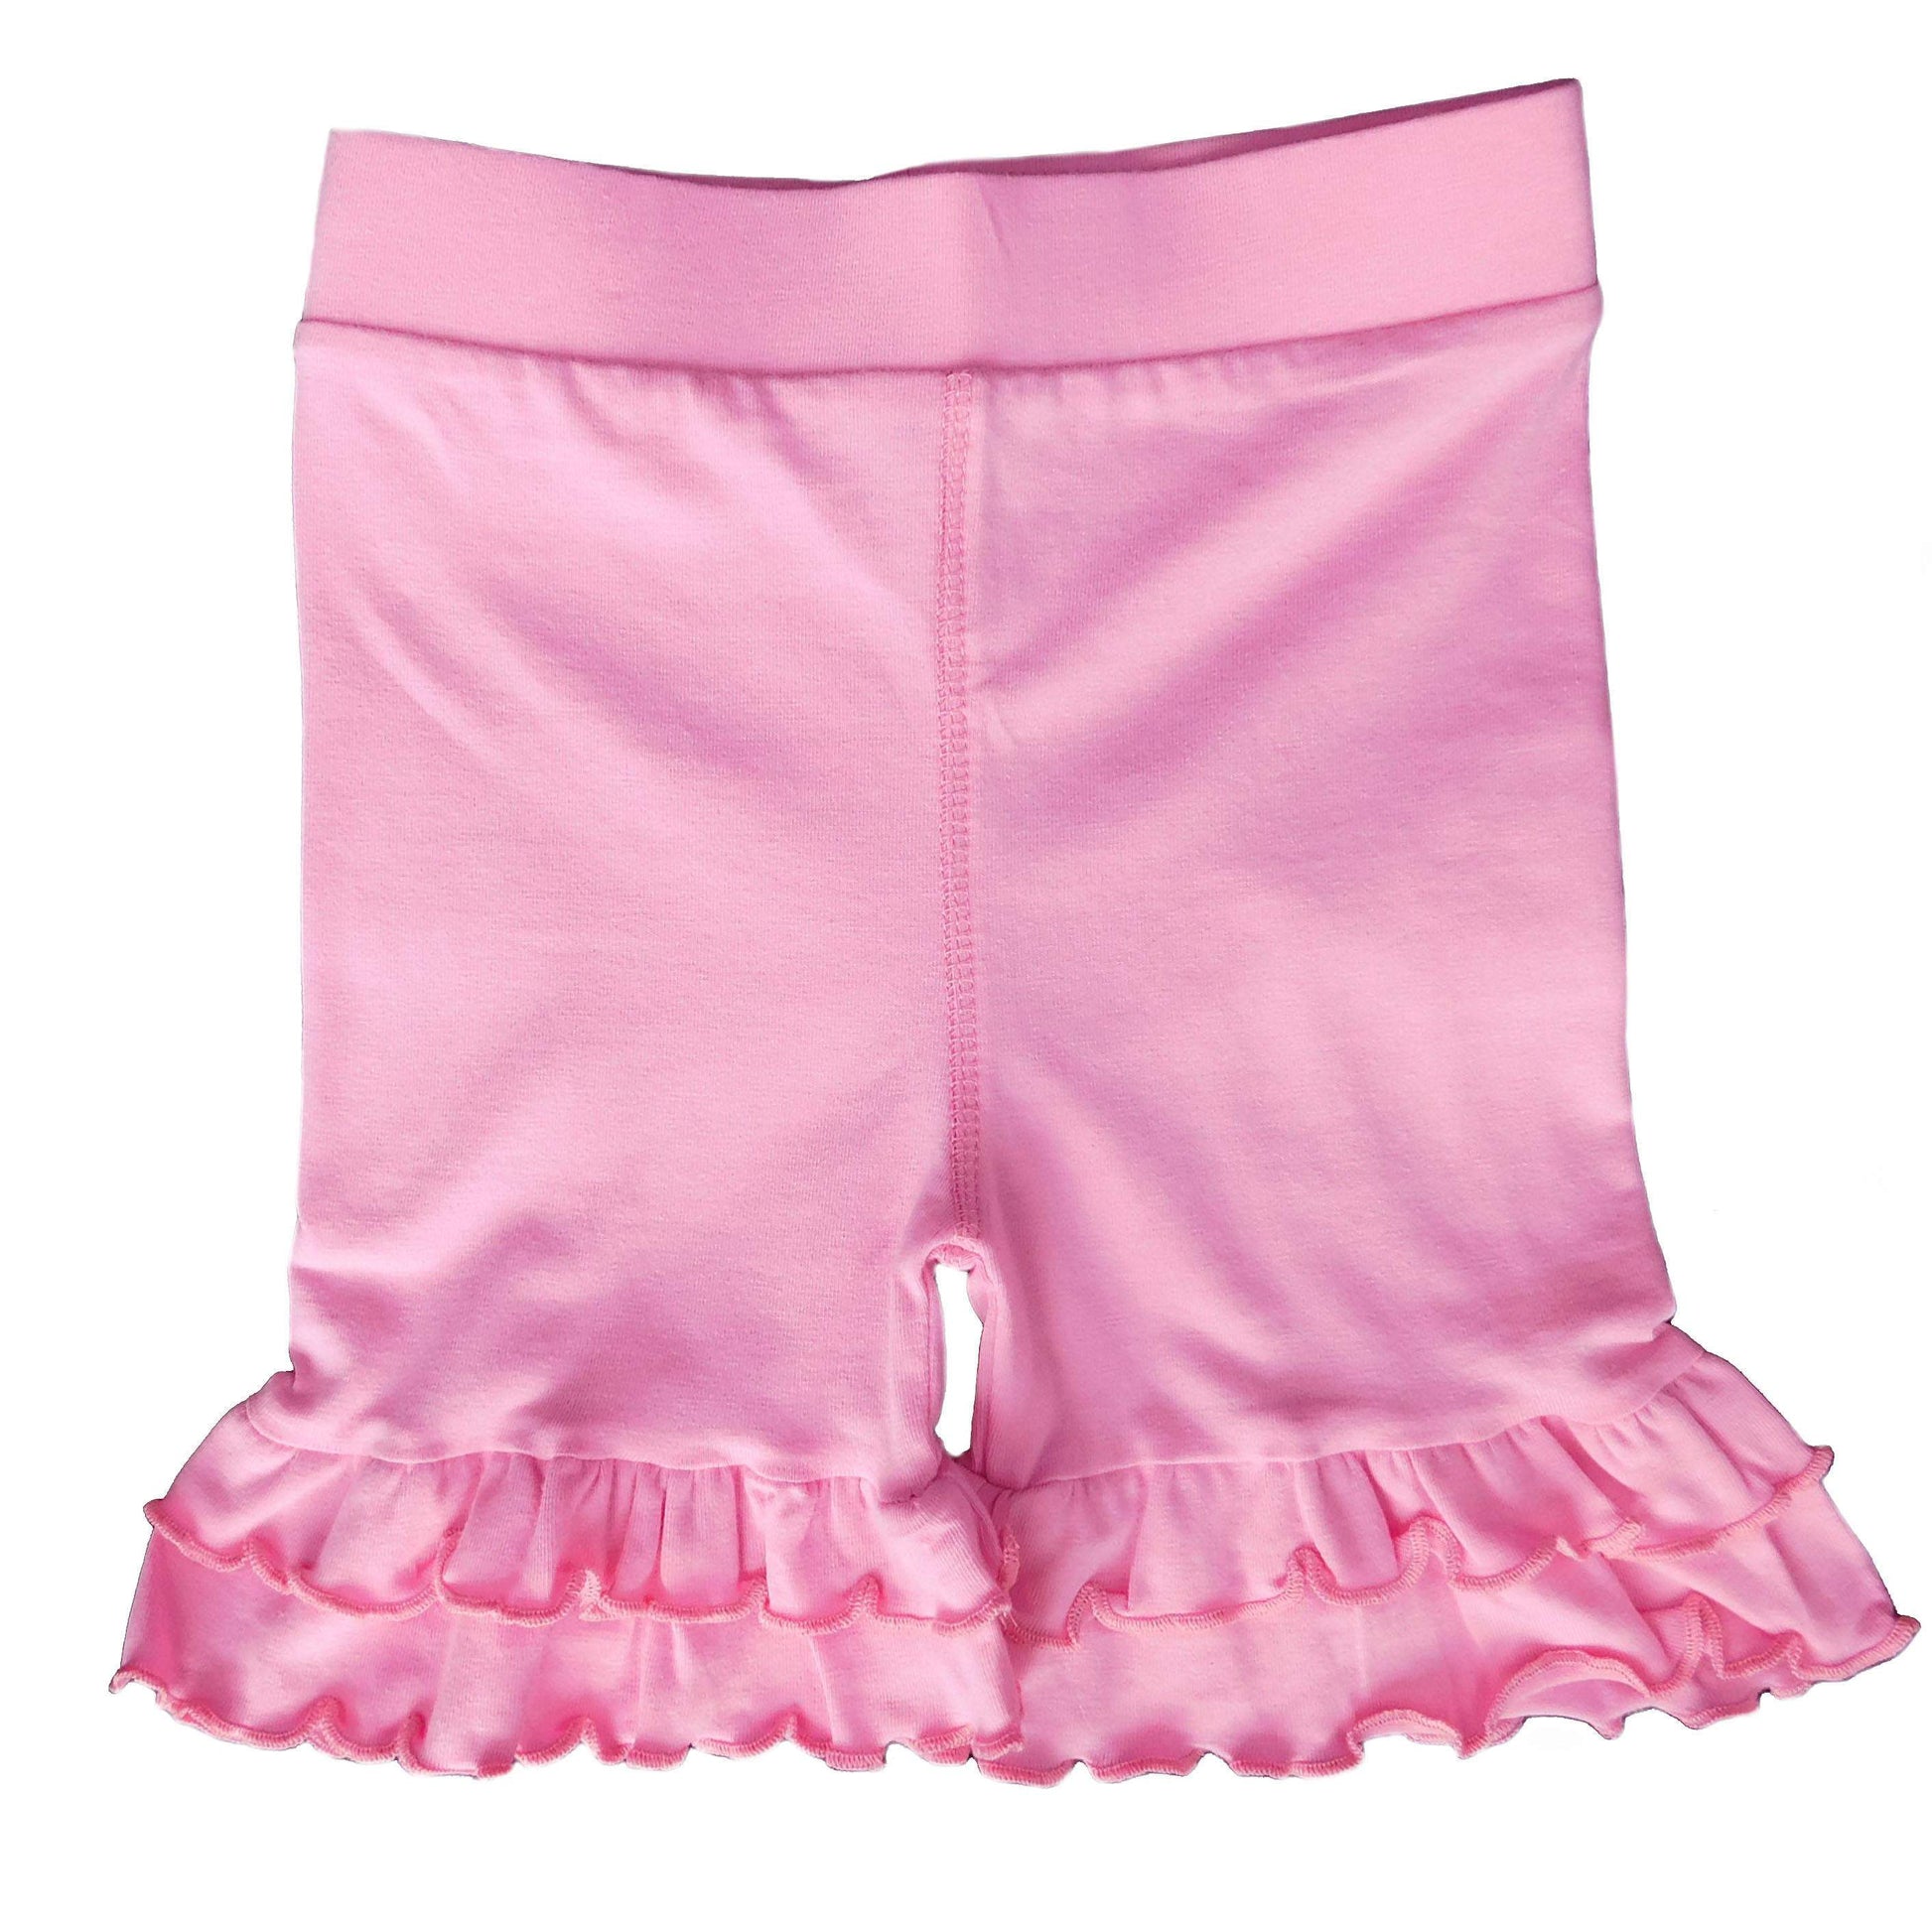 Pink Stretch Cotton Knit Ruffled Shorts 4-8Y-AnnLoren-4-5T,6,7-8,ANNLOREN,Pink,Shorts,Spring & Summer,Spring & Summer 2020